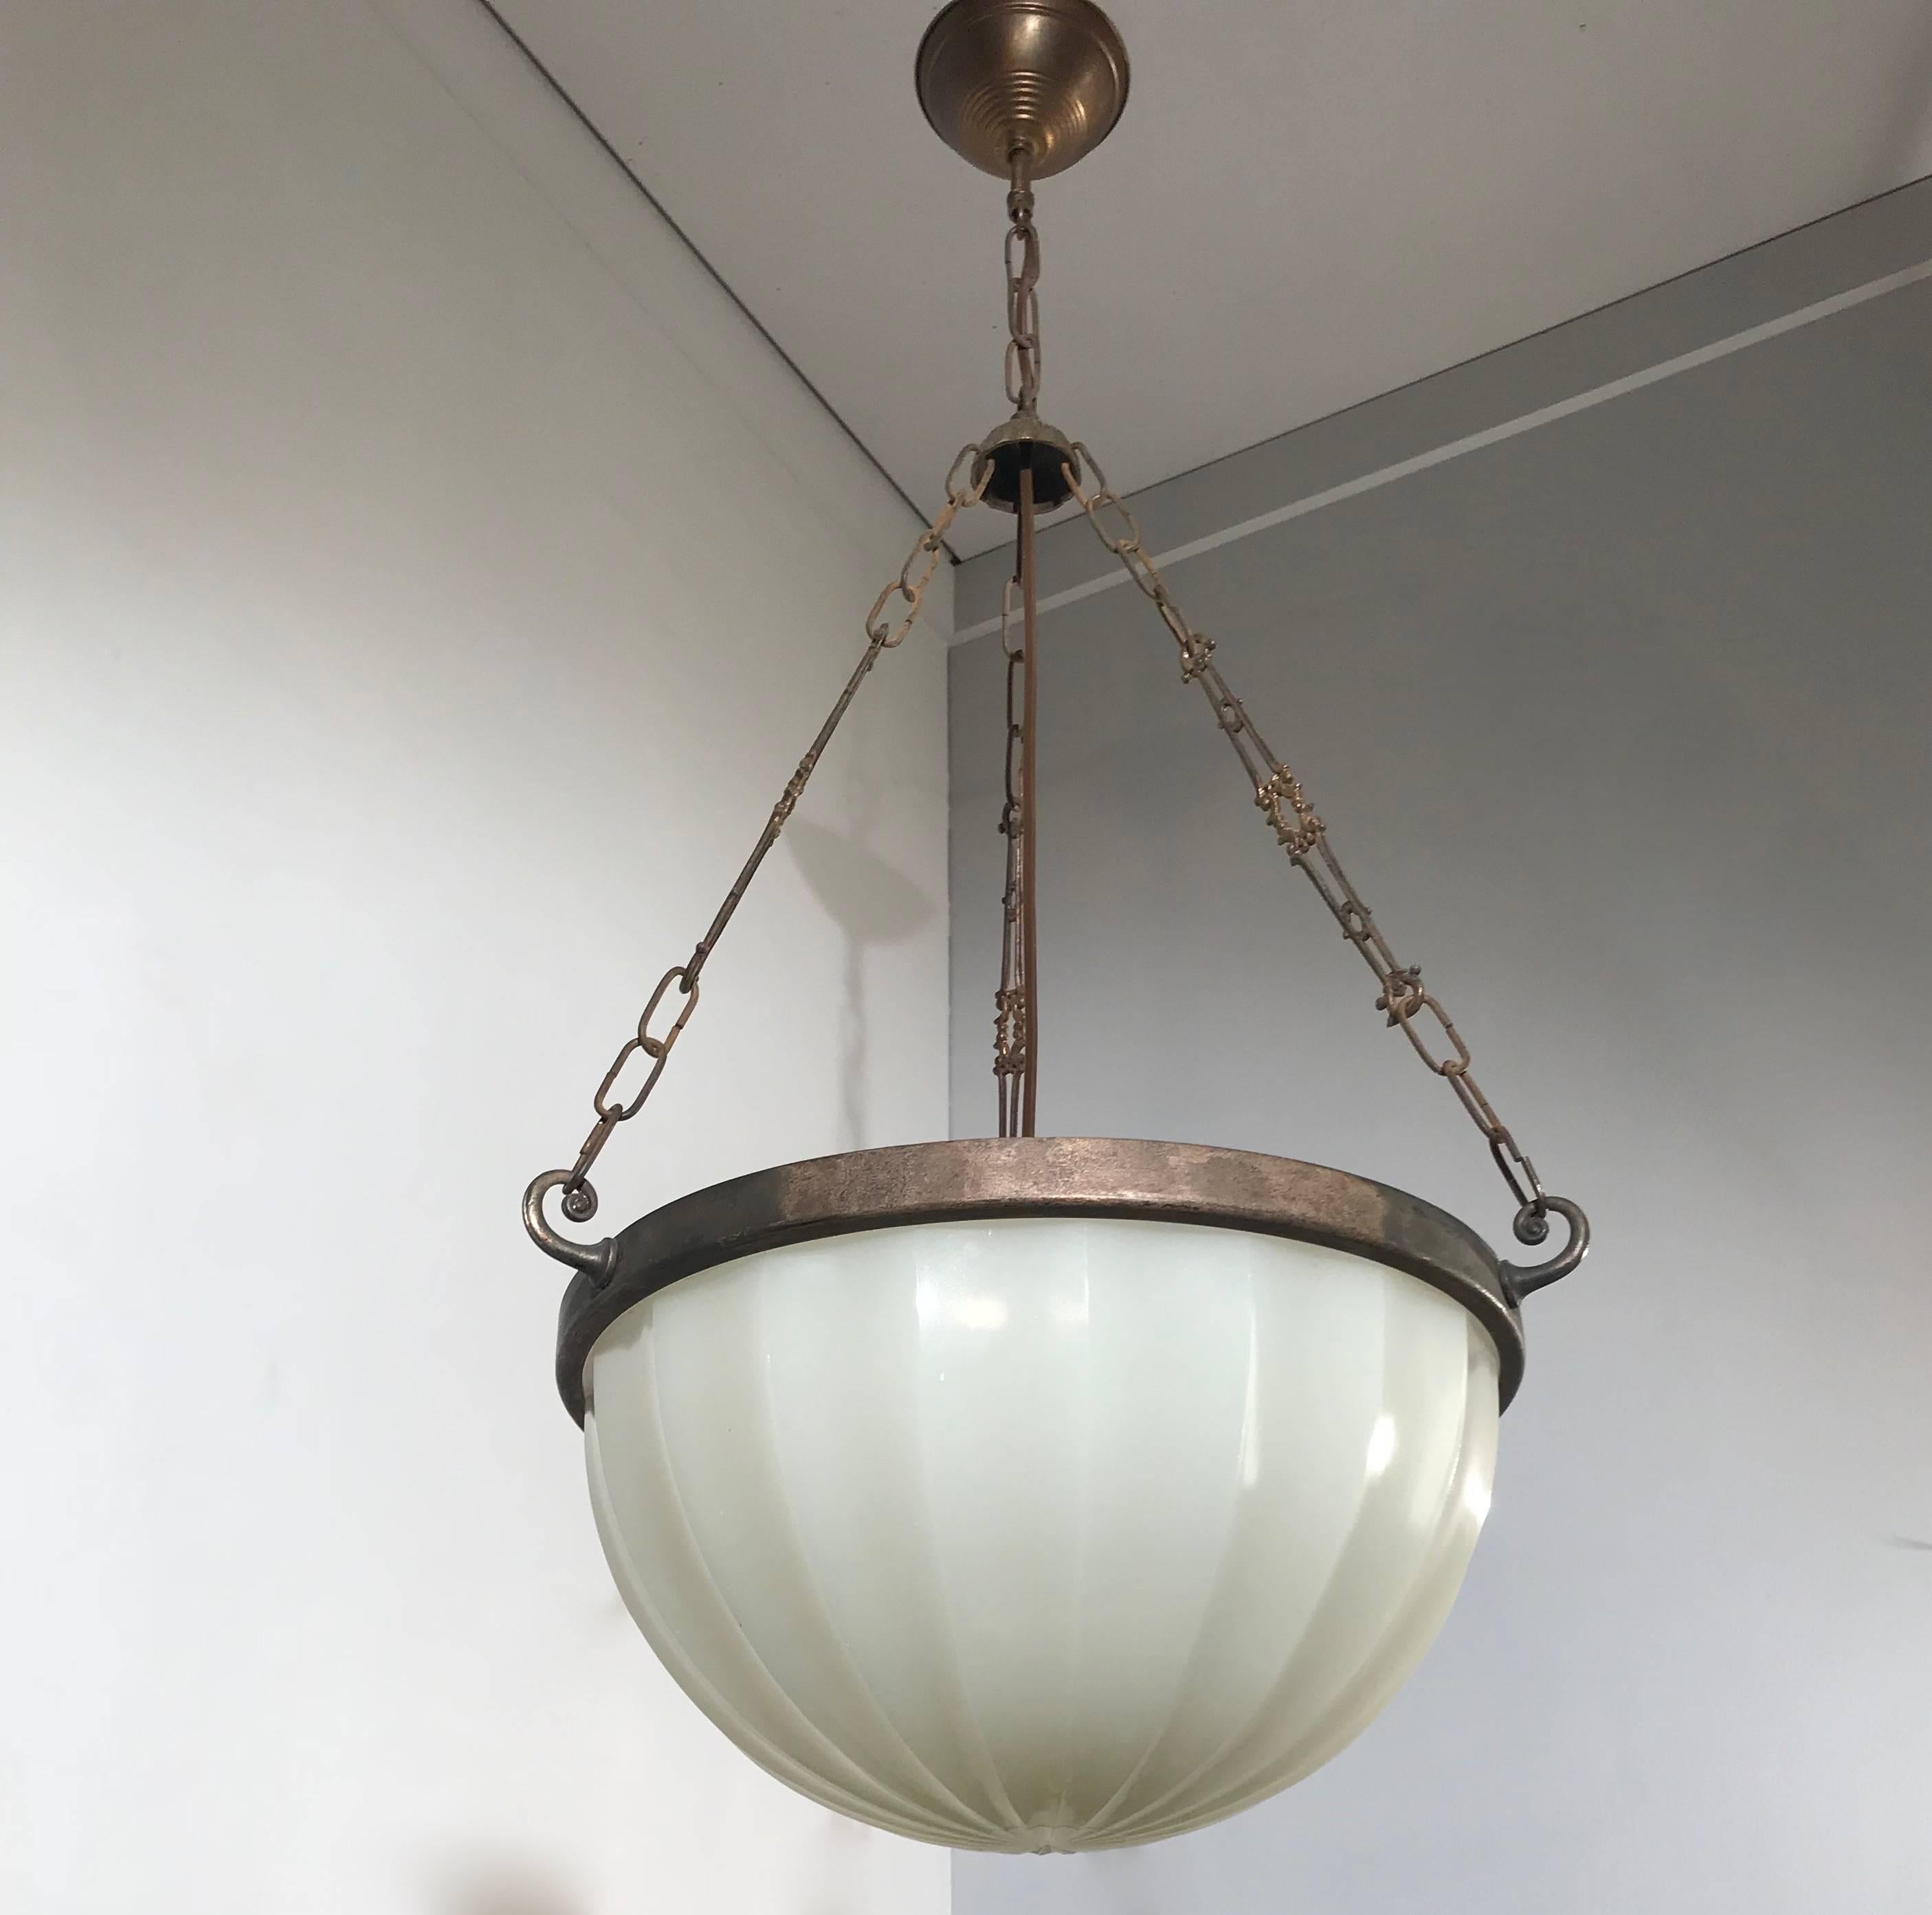 Stylish circa 1920 pendant, attributed to Jefferson of America.

From another one of our The Hague contacts we acquired this rare pendant with its beautiful and thick glass shade. This wonderful light fixture is an absolute joy to own and look at.